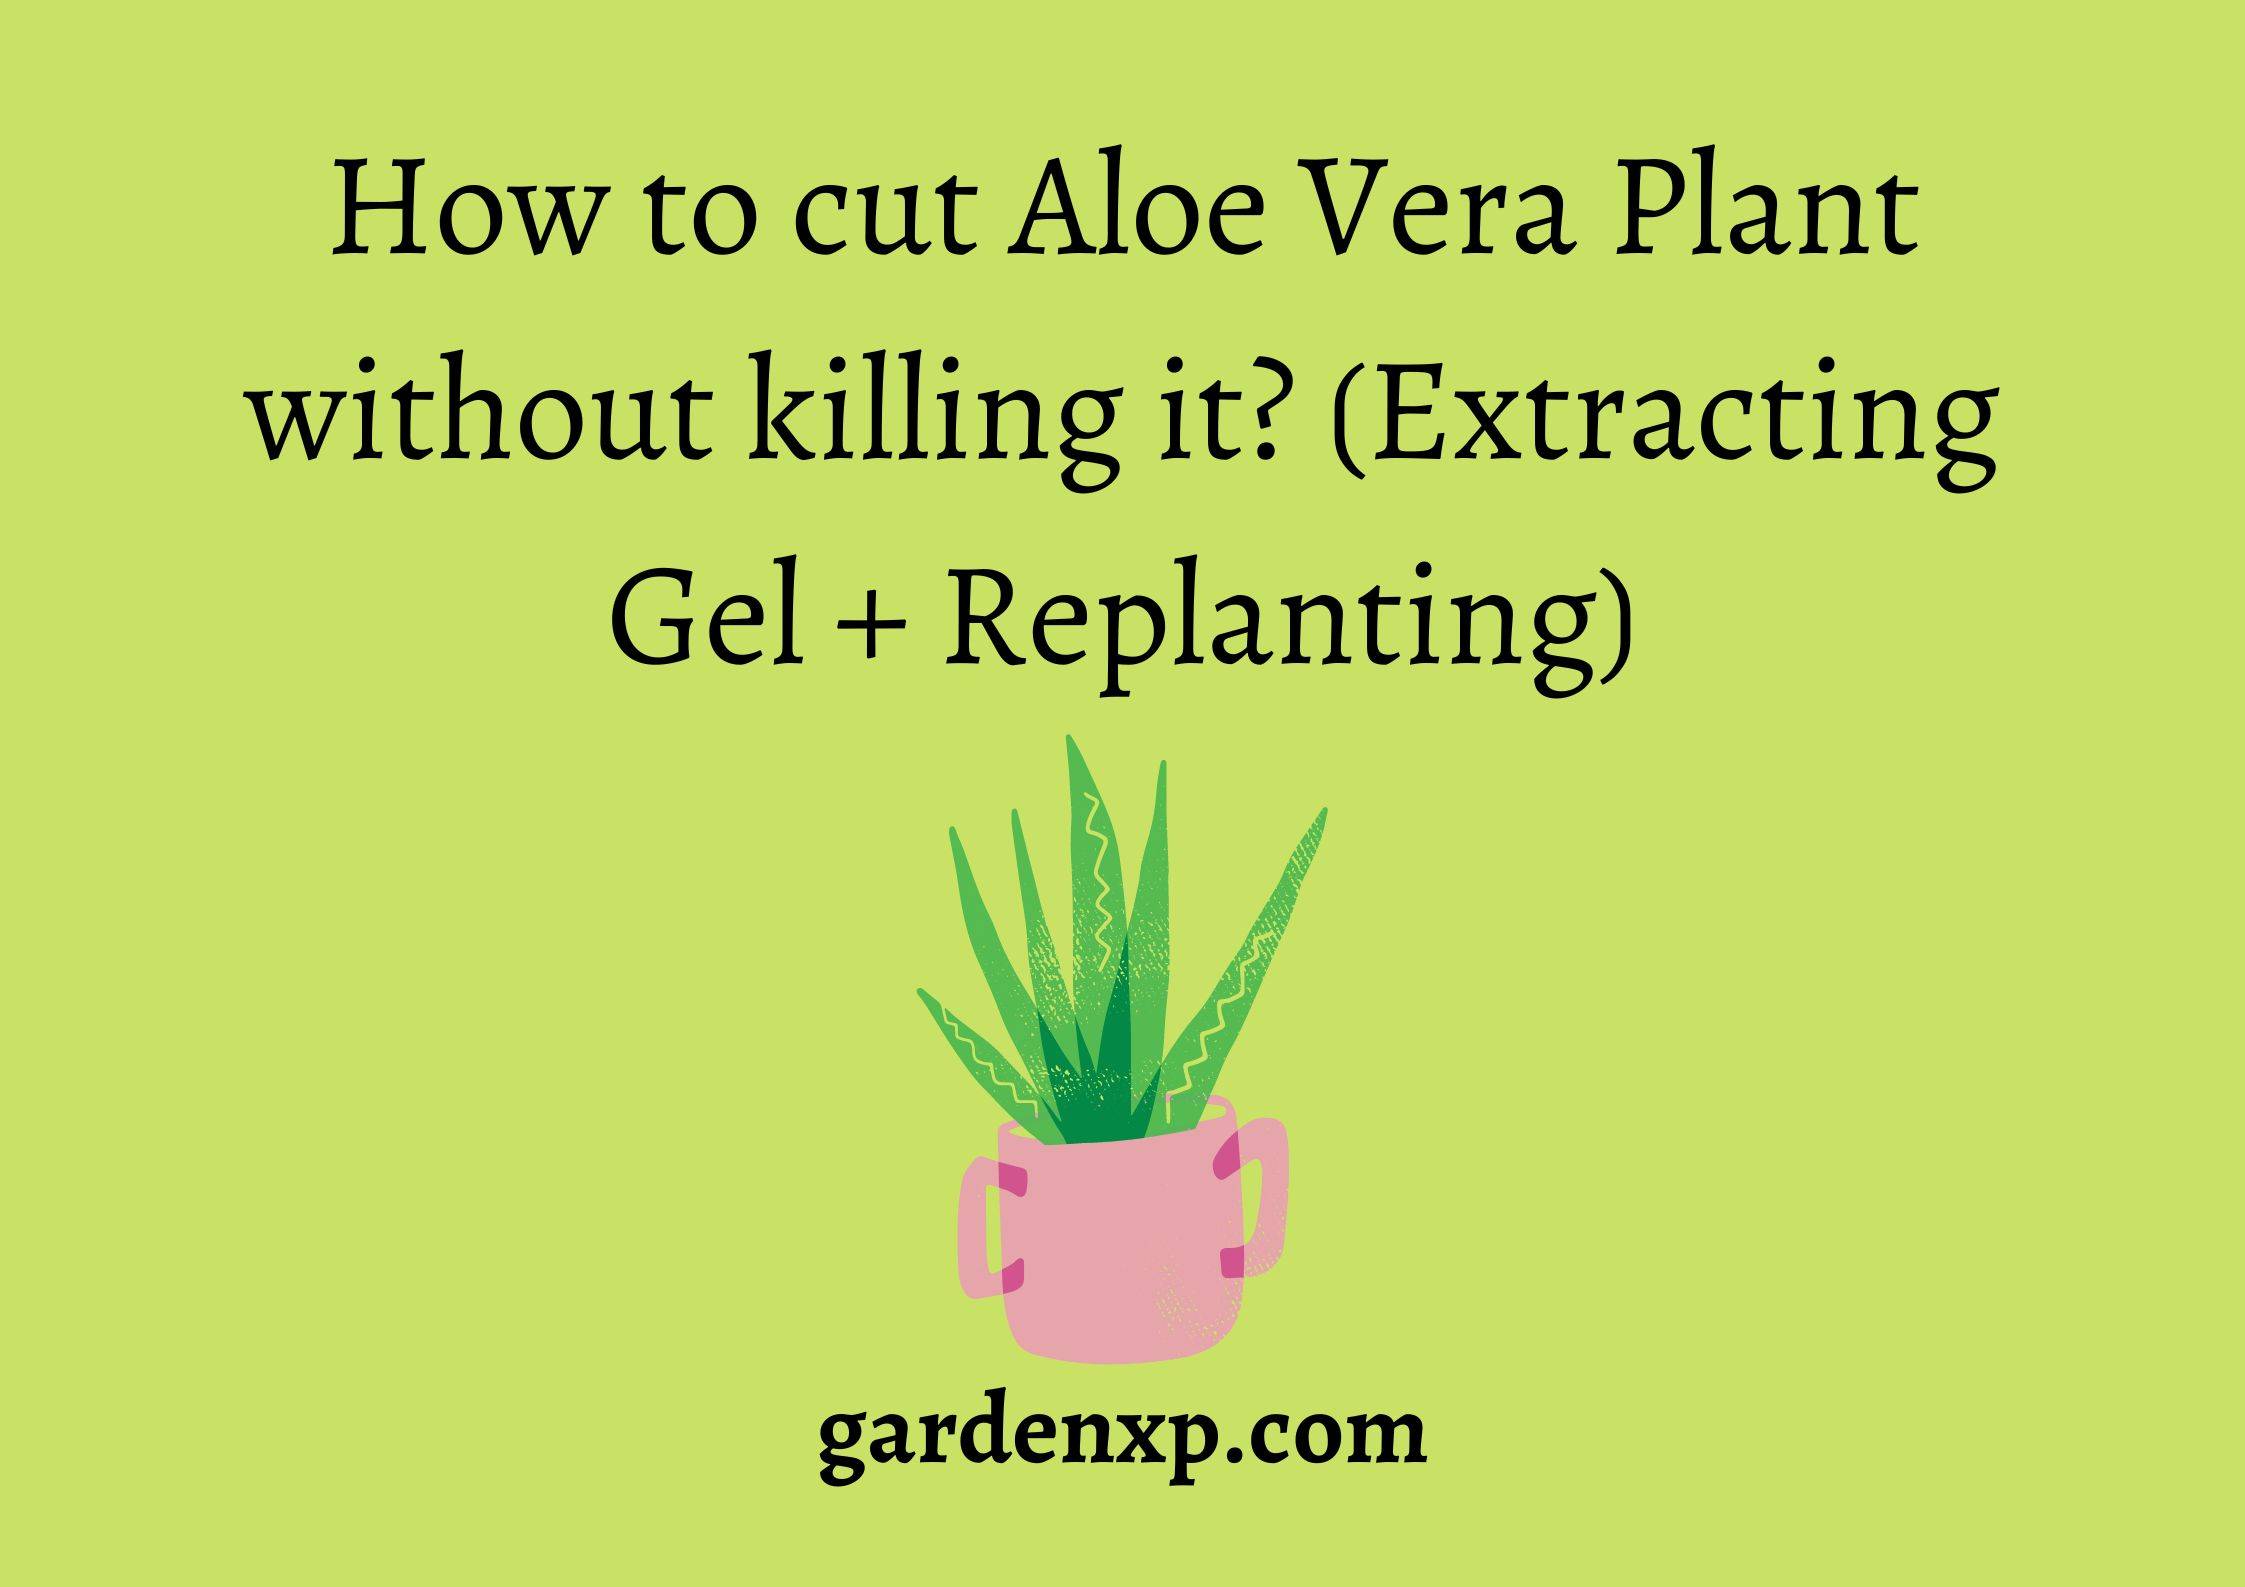 How to cut Aloe Vera Plant without killing it? (Extracting Gel + Replanting)